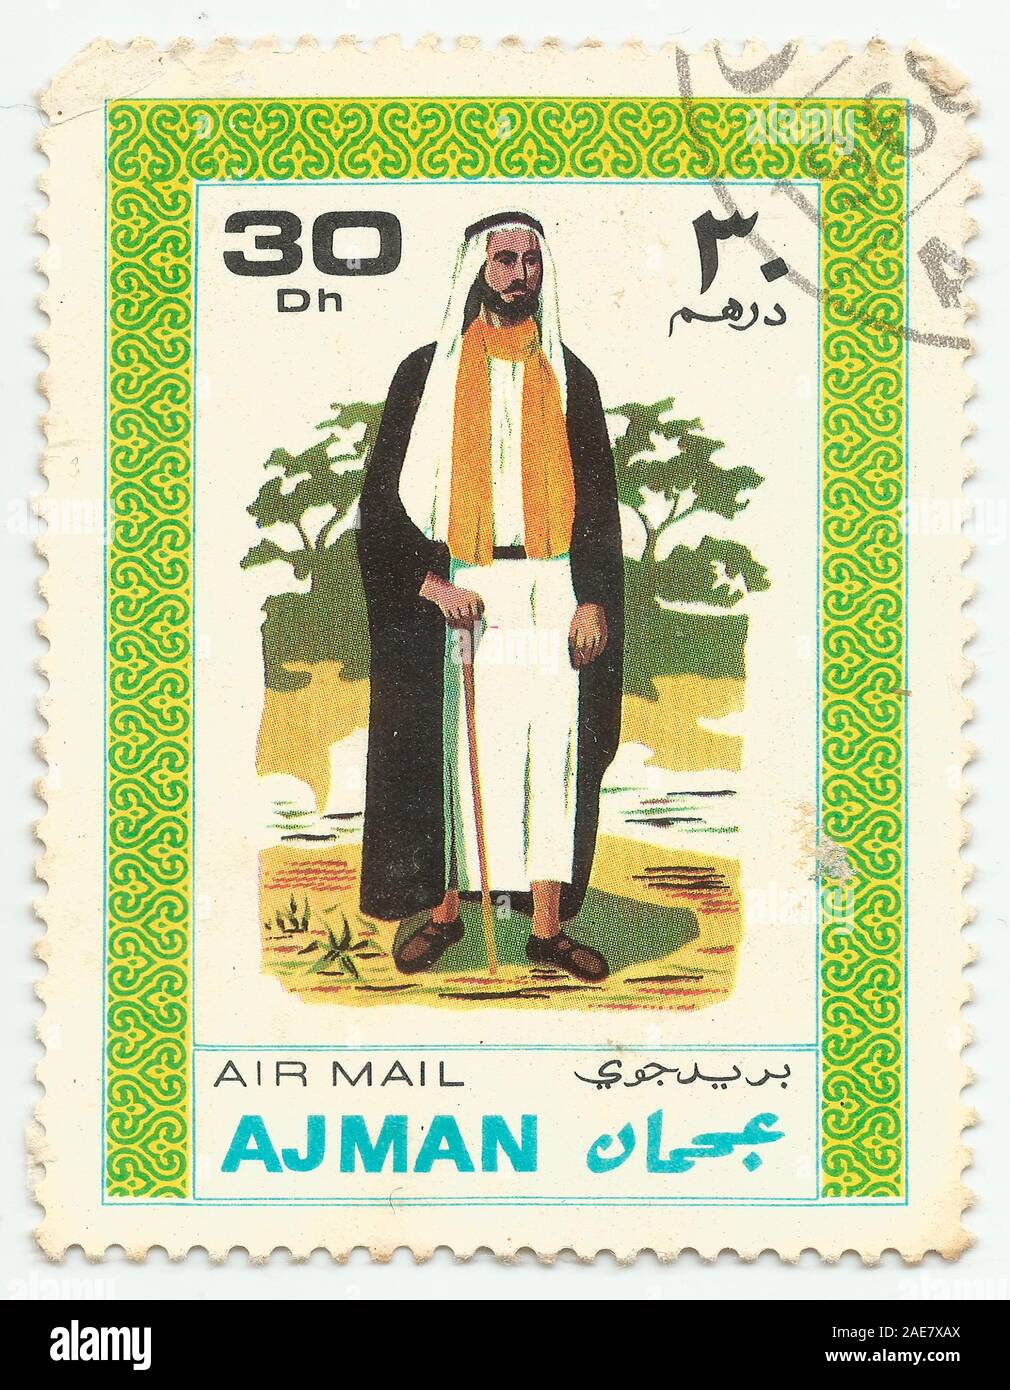 MERIDA, EXTREMADURA, SPAIN. DIC, 01, 2.108 - A stamp shows the typical clothes of peolpe of Ajman, city of Emirates Arab United . CIRCA: 1.968 Stock Photo